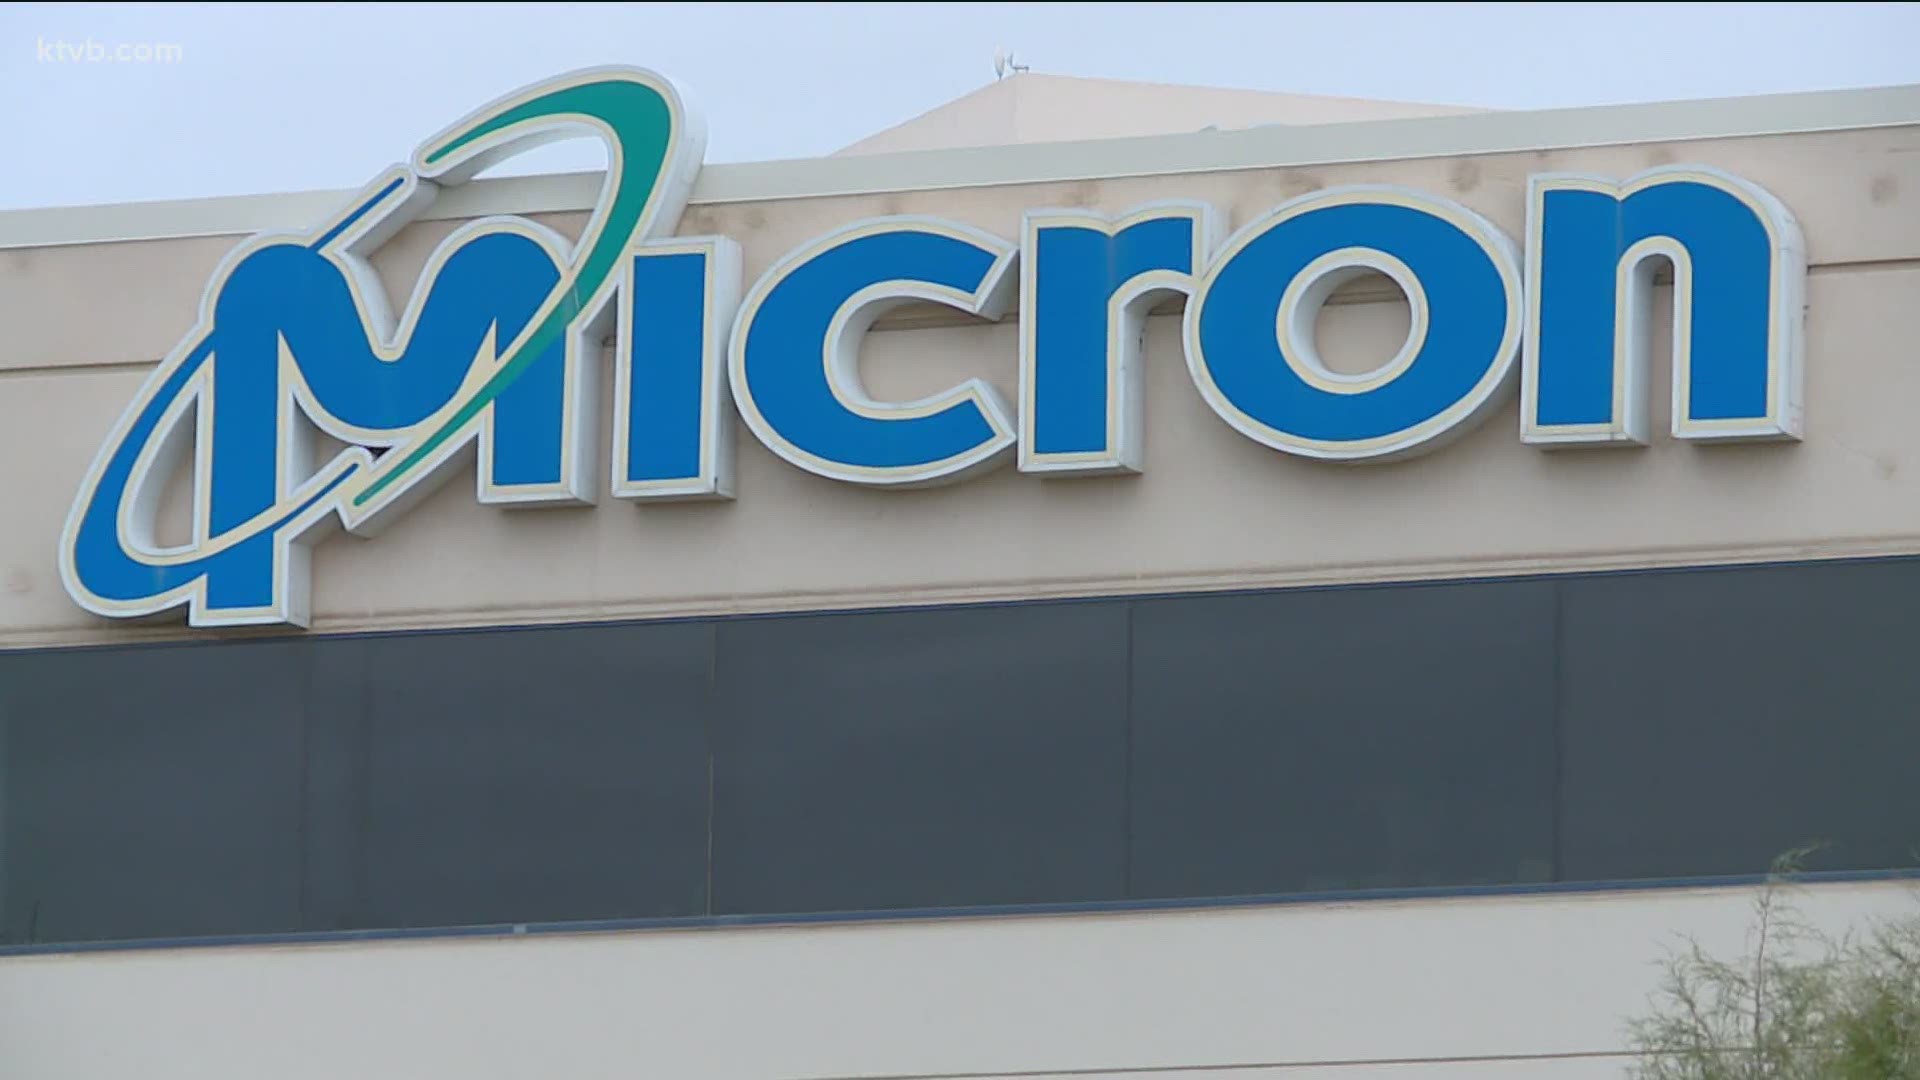 Micron says it is changing its strategy a bit to further strengthen a focus on memory and storage innovations.  They will invest more in new memory products.